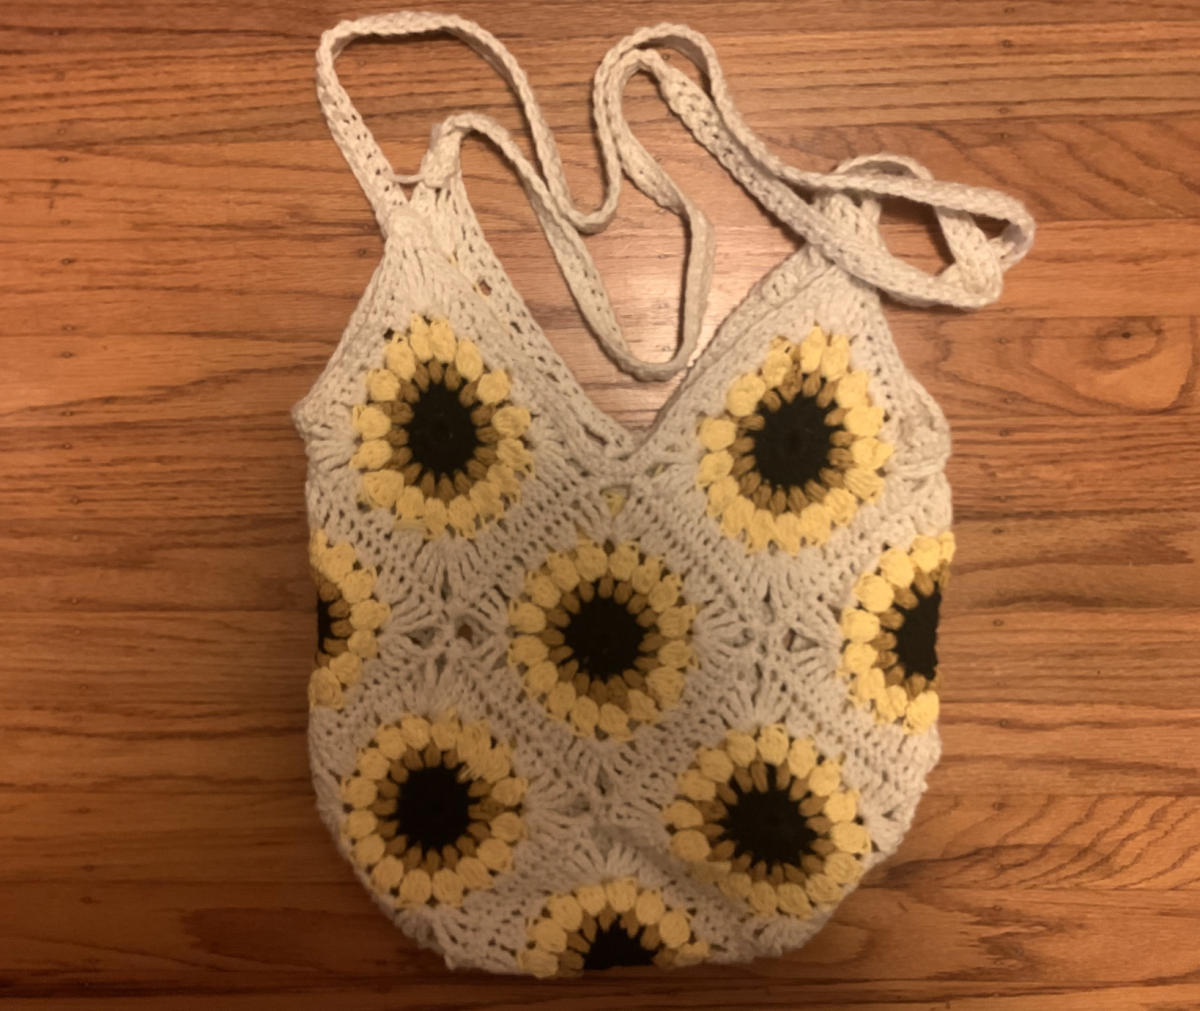 Tote+bags+can+be+made+by+crocheting+sunflower+granny+squares+together.